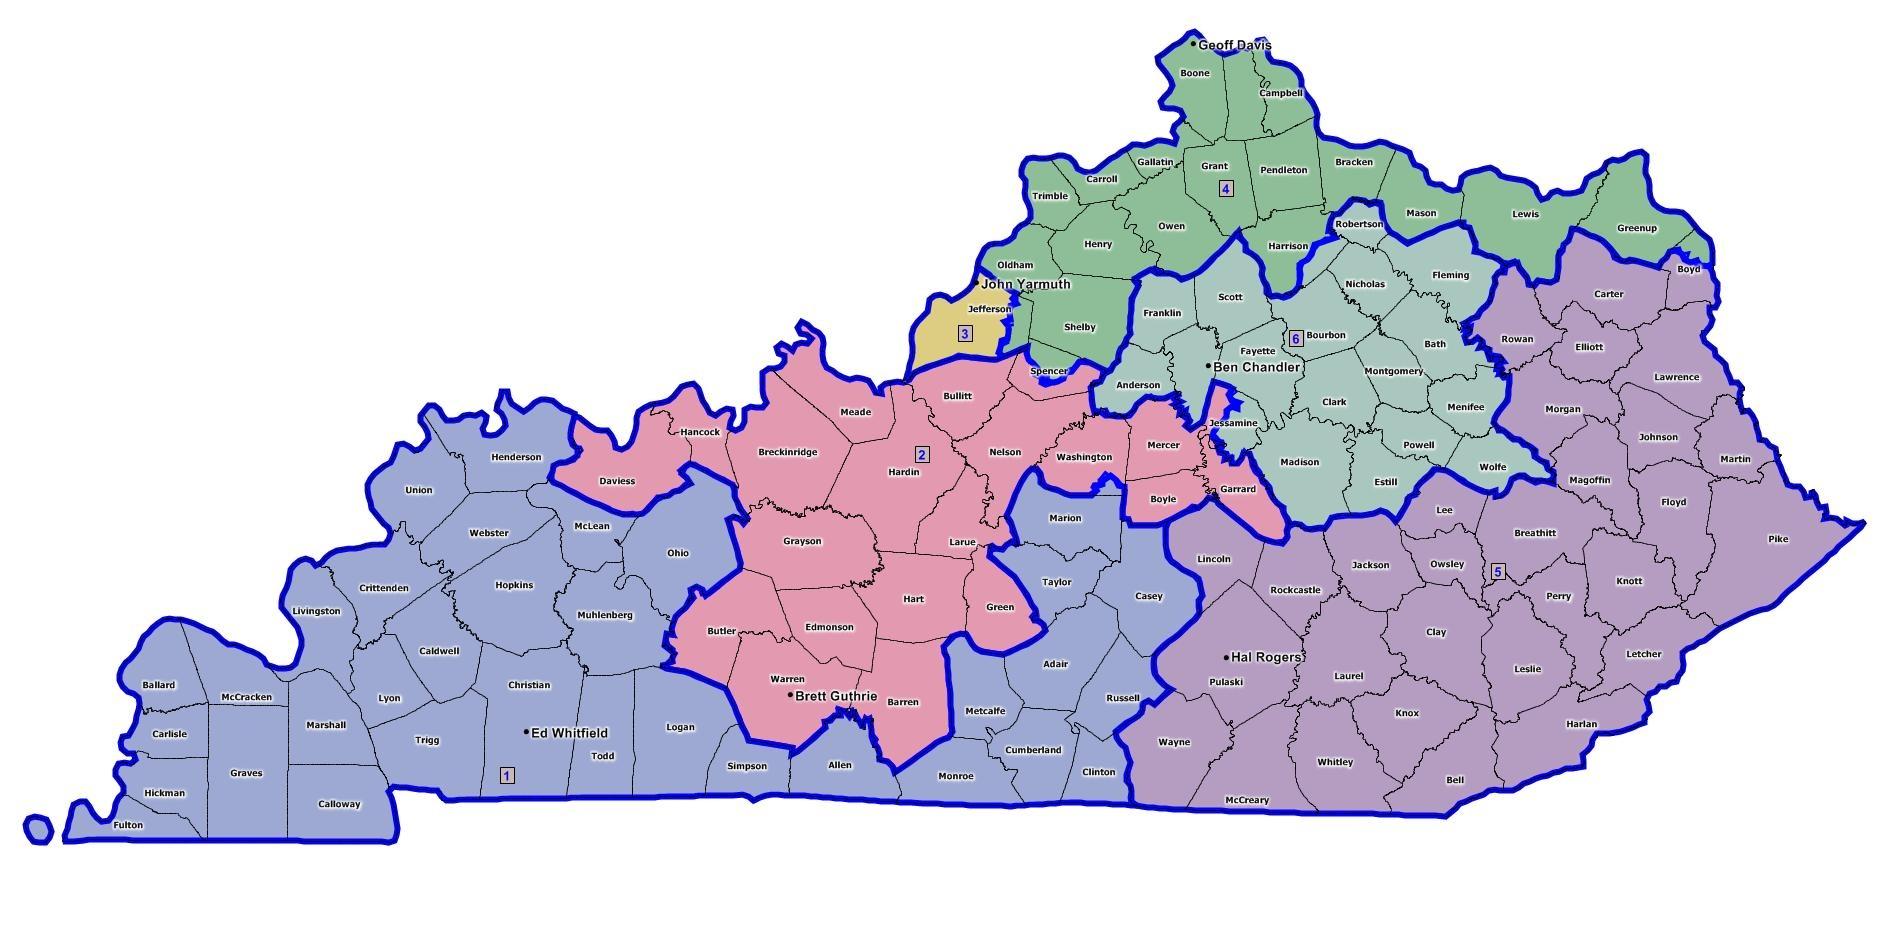 New Kentucky Congressional Districts WKMS